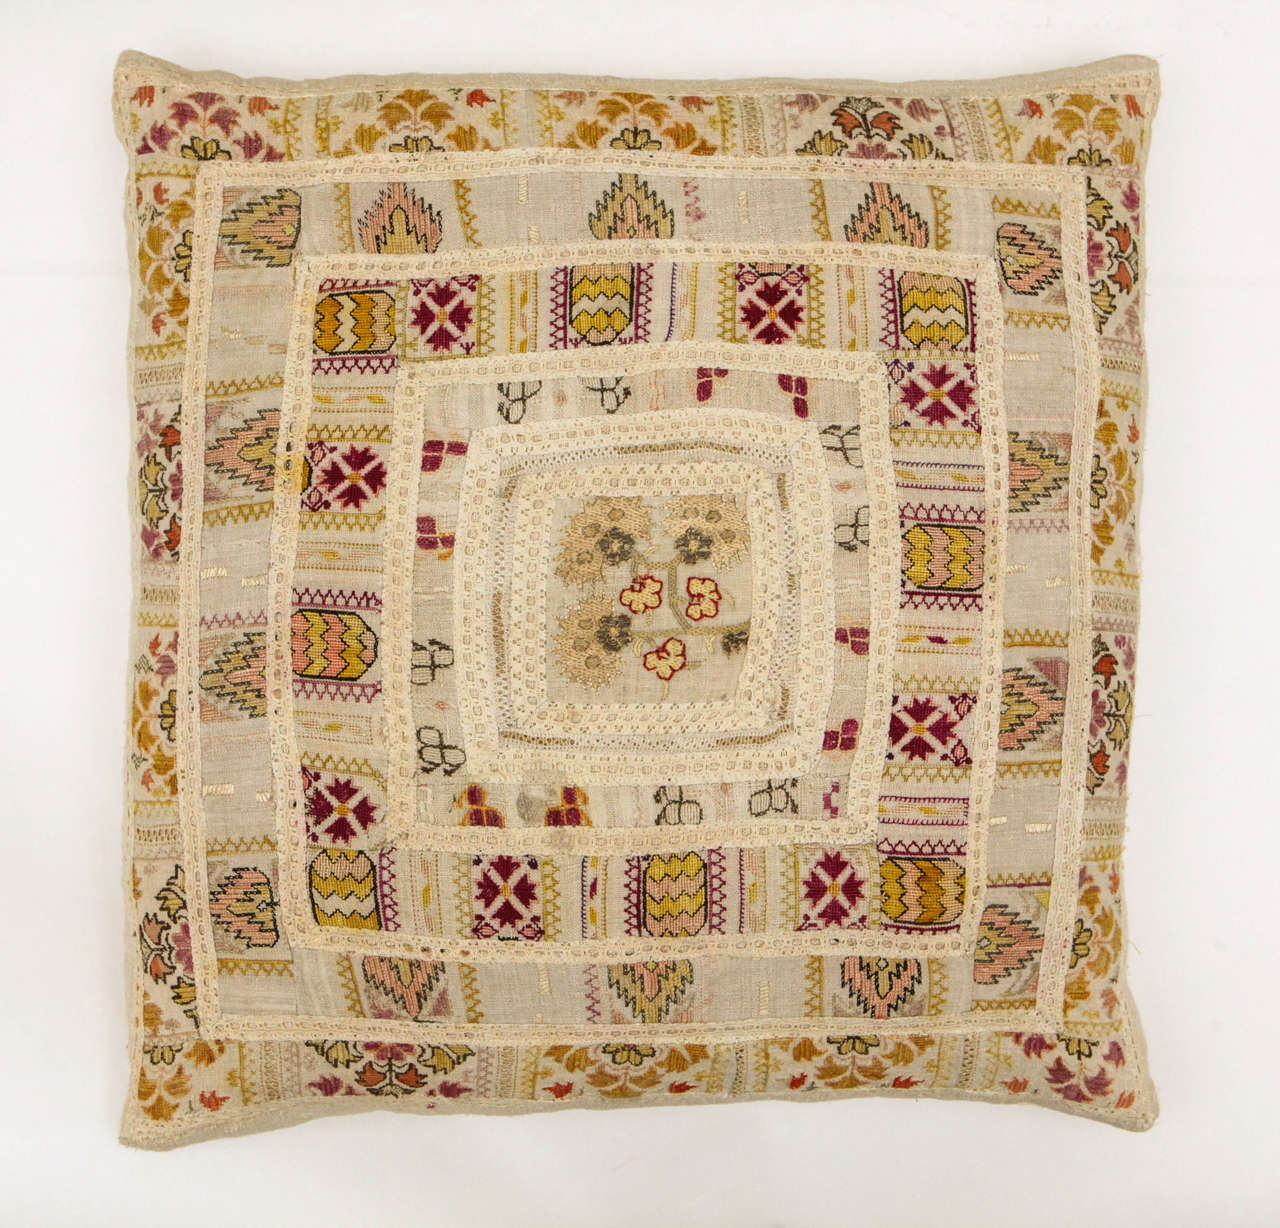 Greek patchwork textile (silk on linen embroidery and lace)  mounted on and backed with vintage European hand woven line.  Magenta, gold, pink, orange, red and ivory.  Feather and down fill.